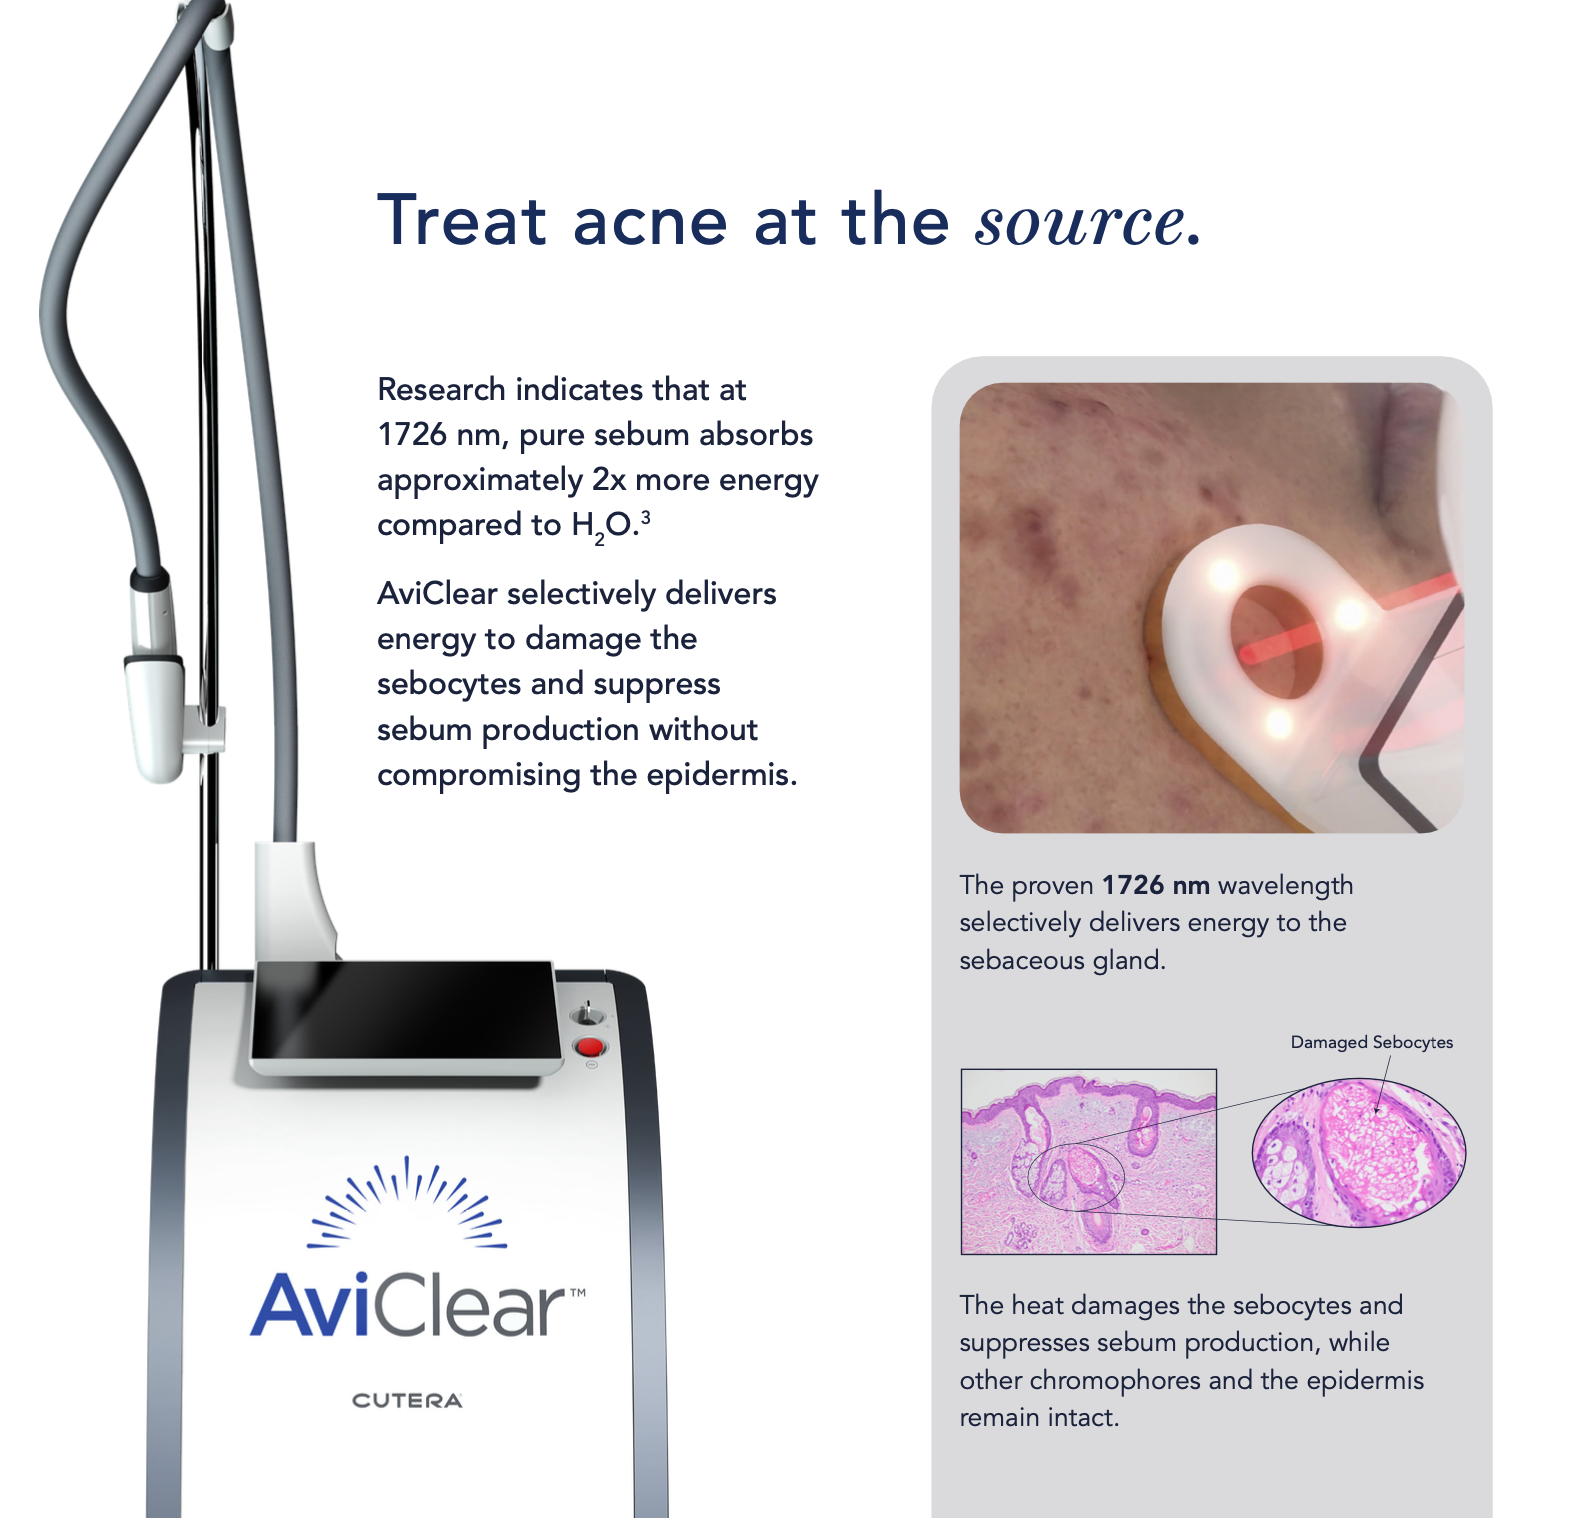 AviClear targeting at oil glands